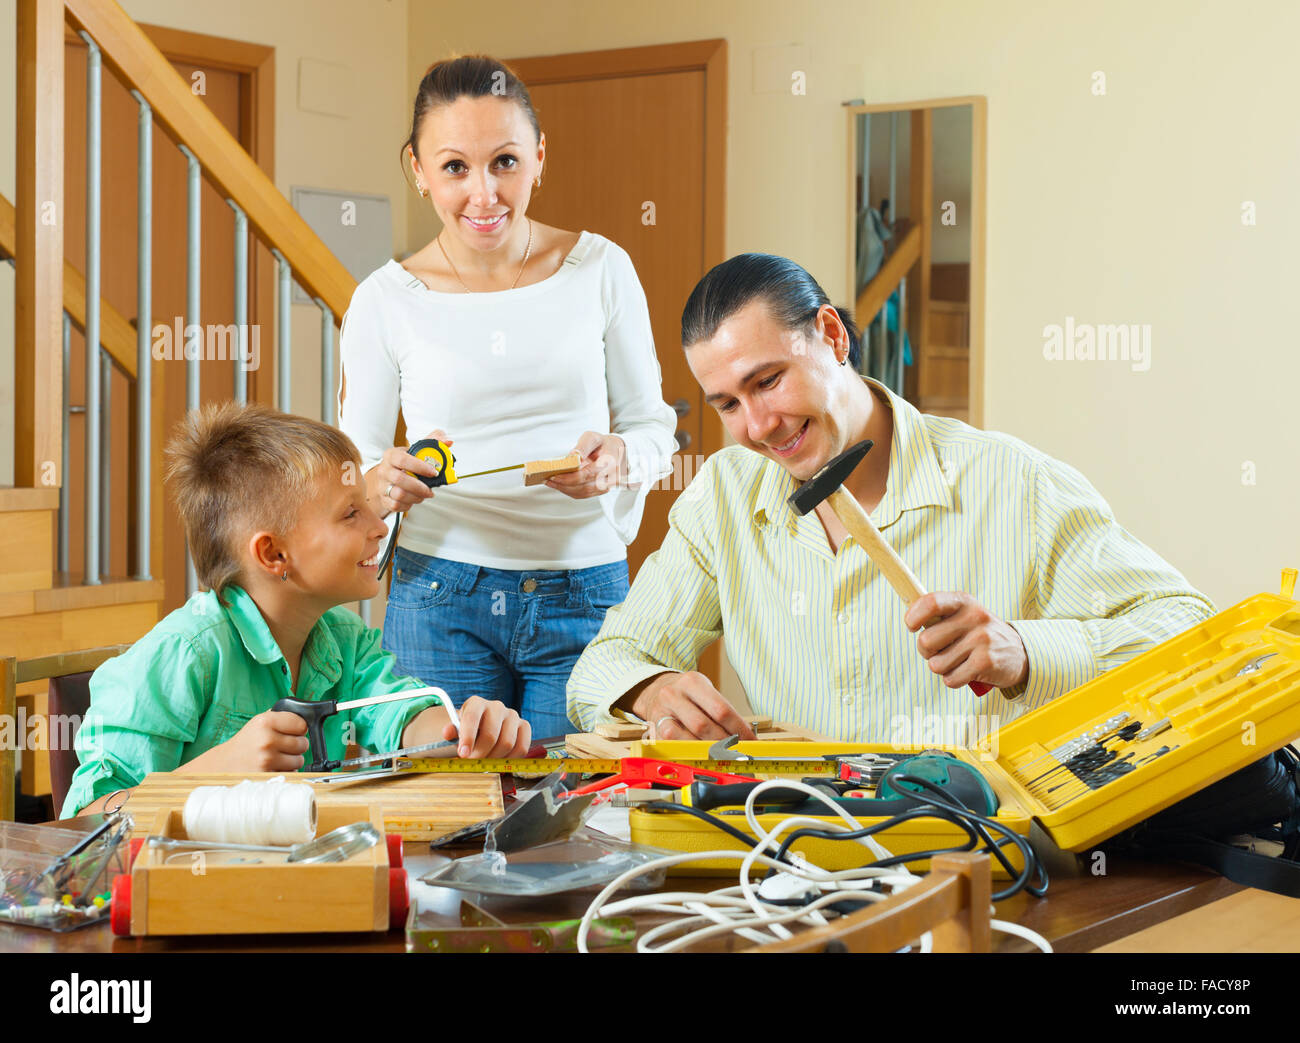 Happy family doing something with the working tools Stock Photo